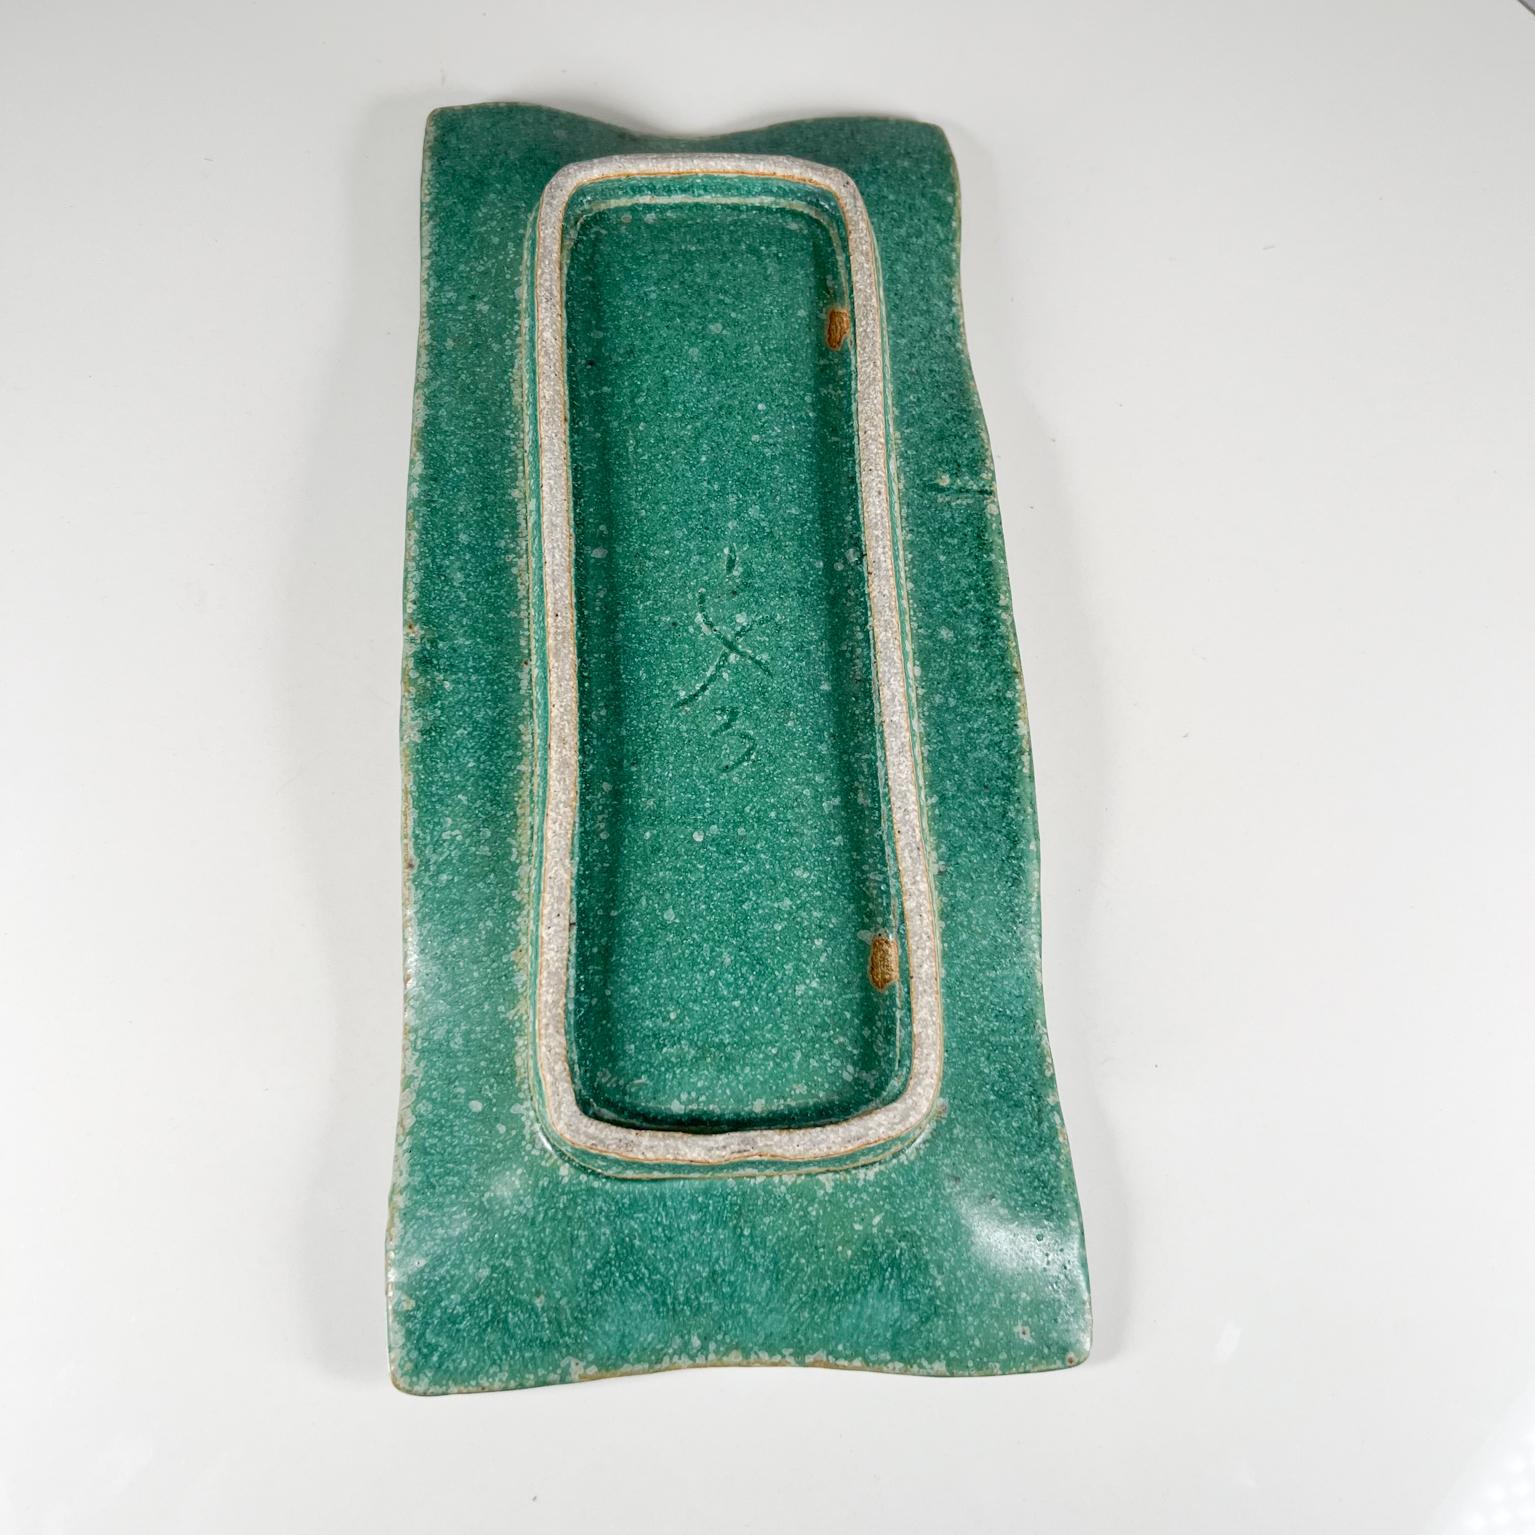 1970s Sculptural Green Wave Dish Studio Pottery Art Ed Thompson For Sale 7